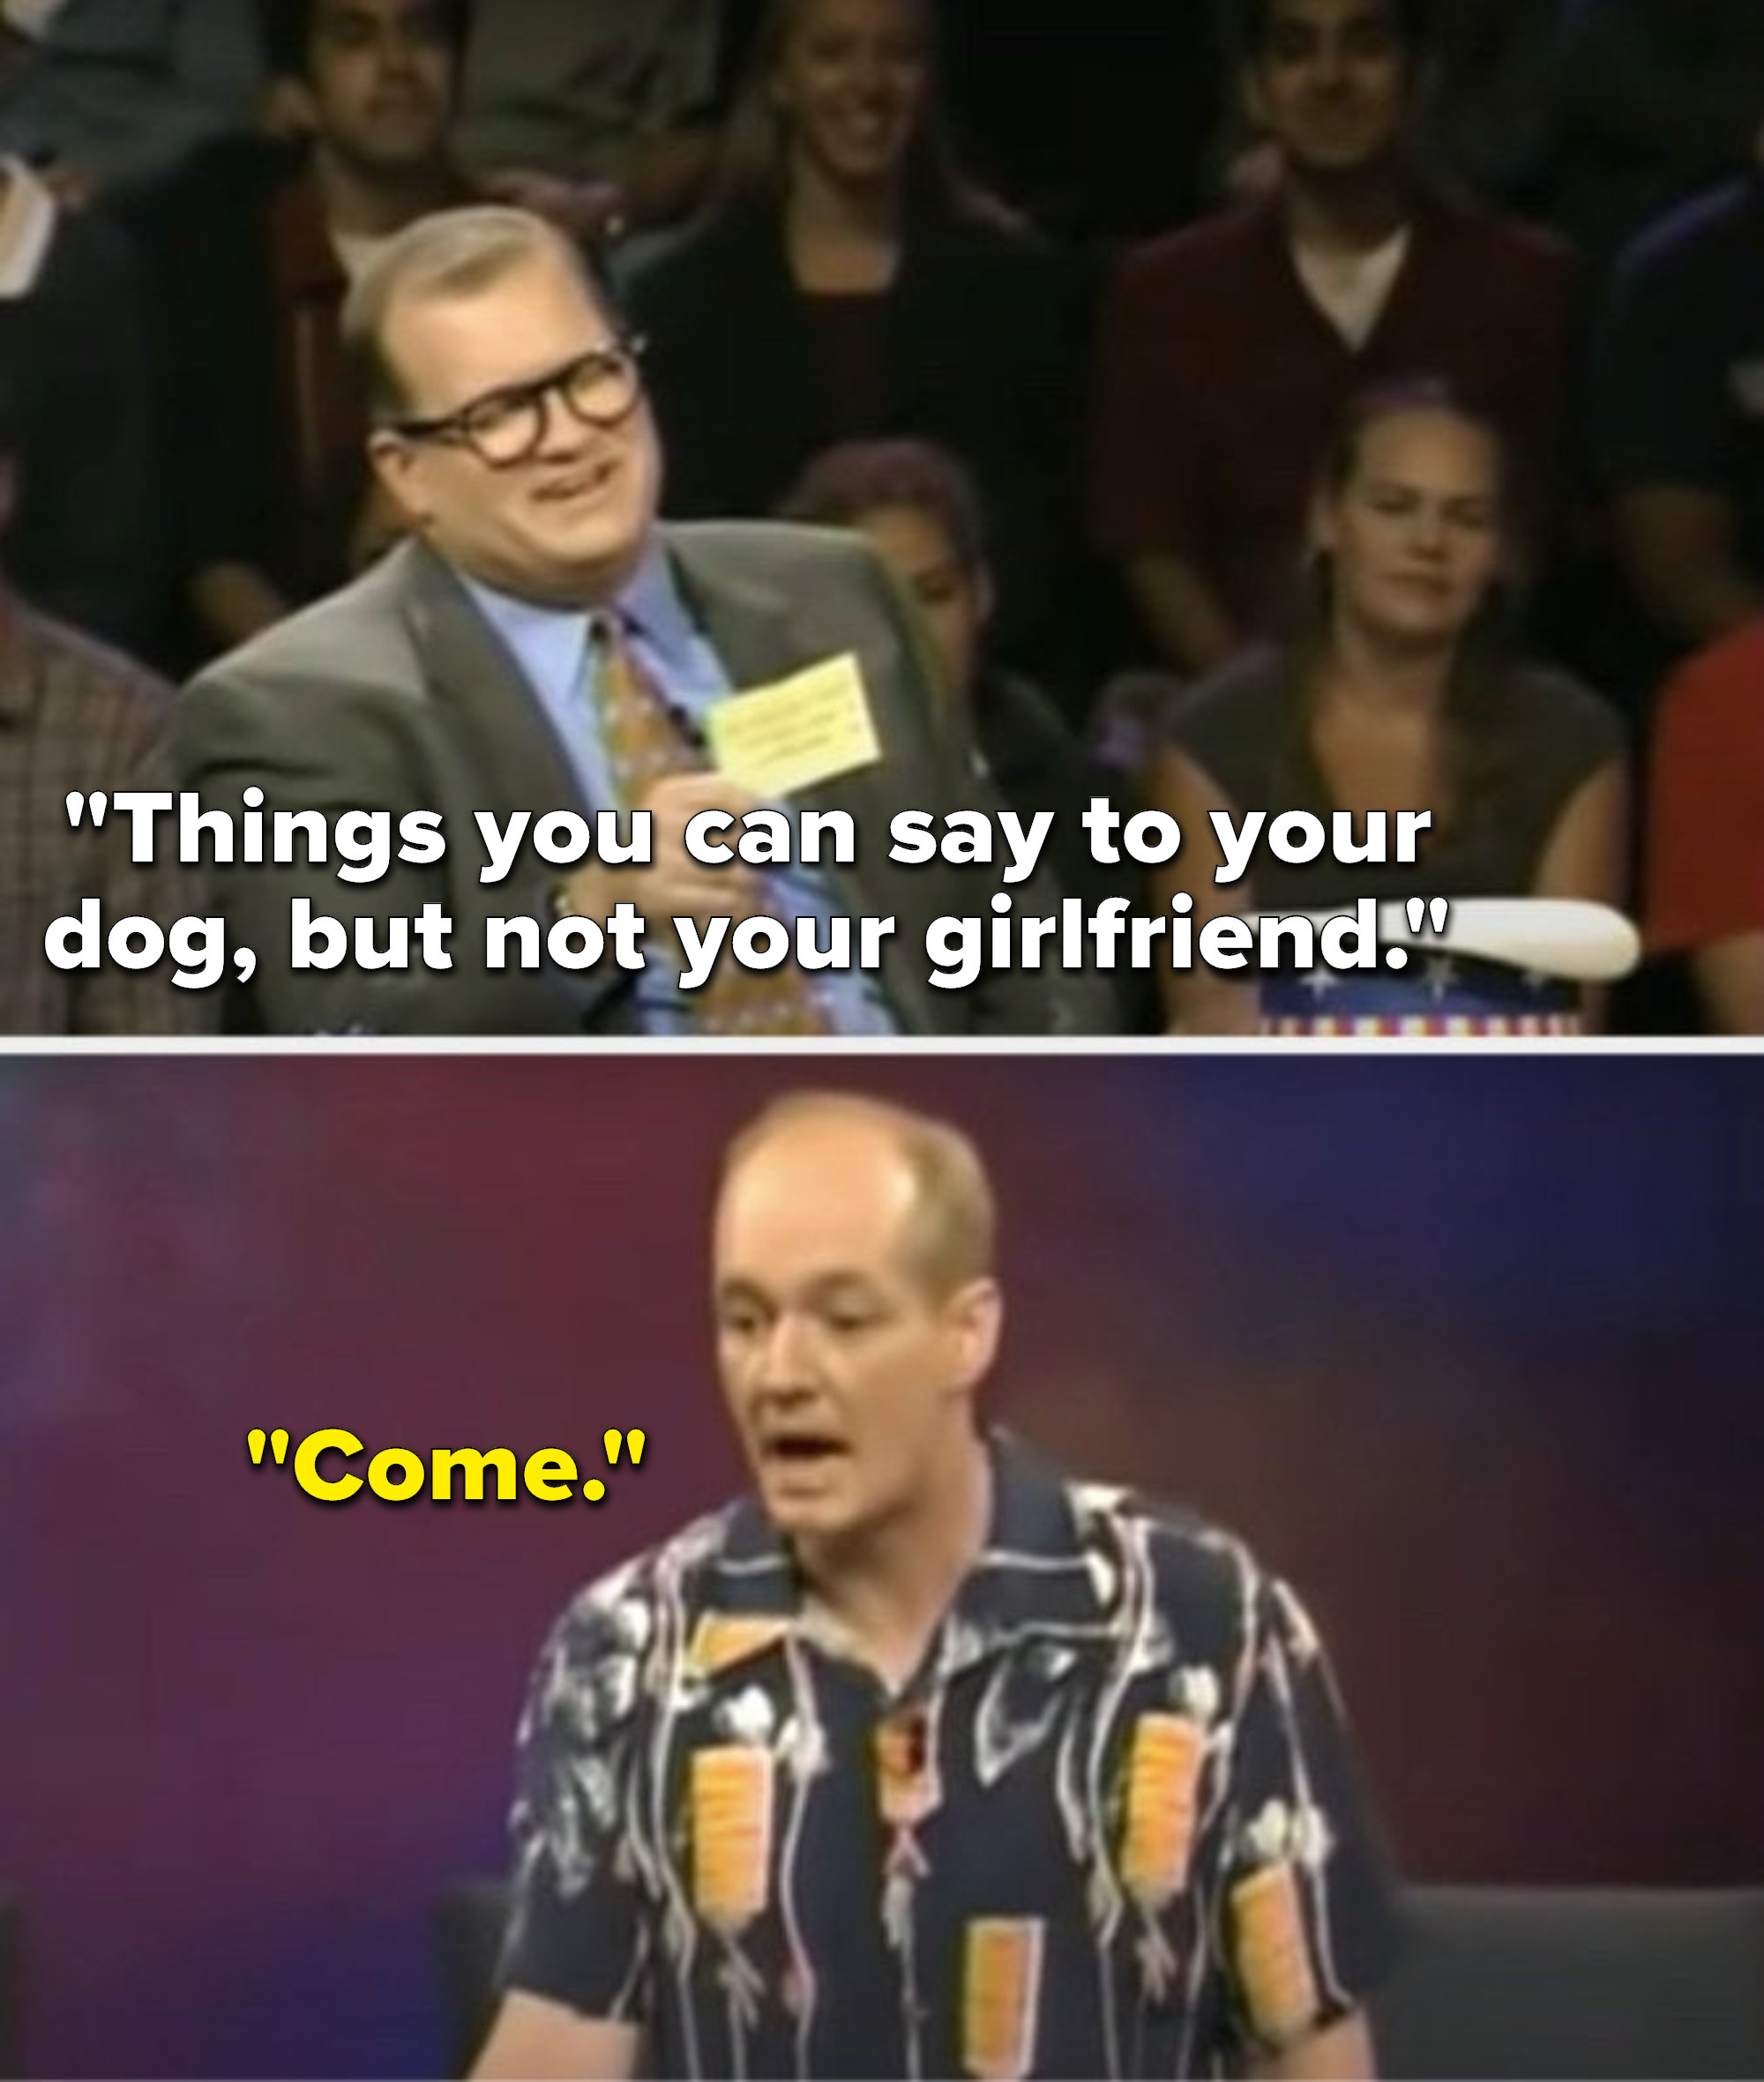 Carey says, &quot;Things you can say to your dog, but not your girlfriend,&quot; and Mochrie says, &quot;Come&quot;